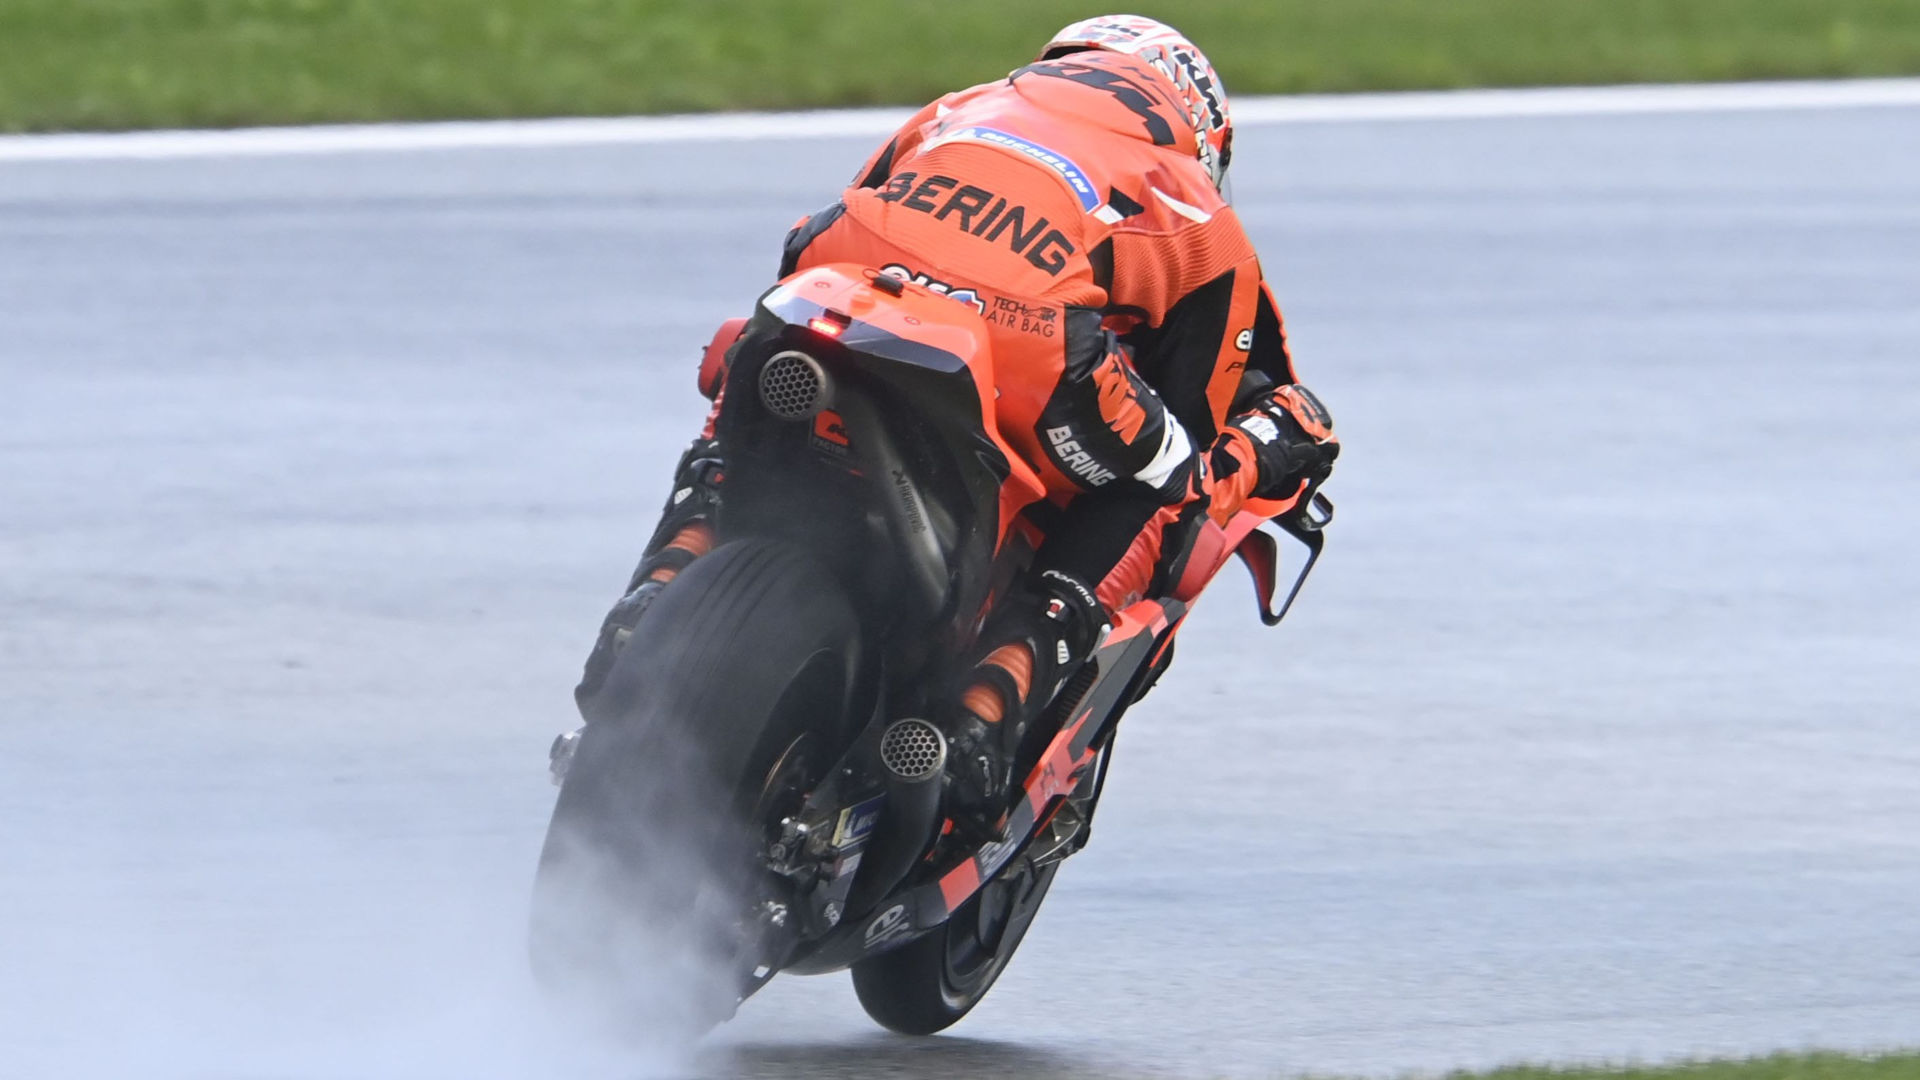 Iker Lecuona in action in the wet. Photo courtesy KTM Factory Racing Tech3.